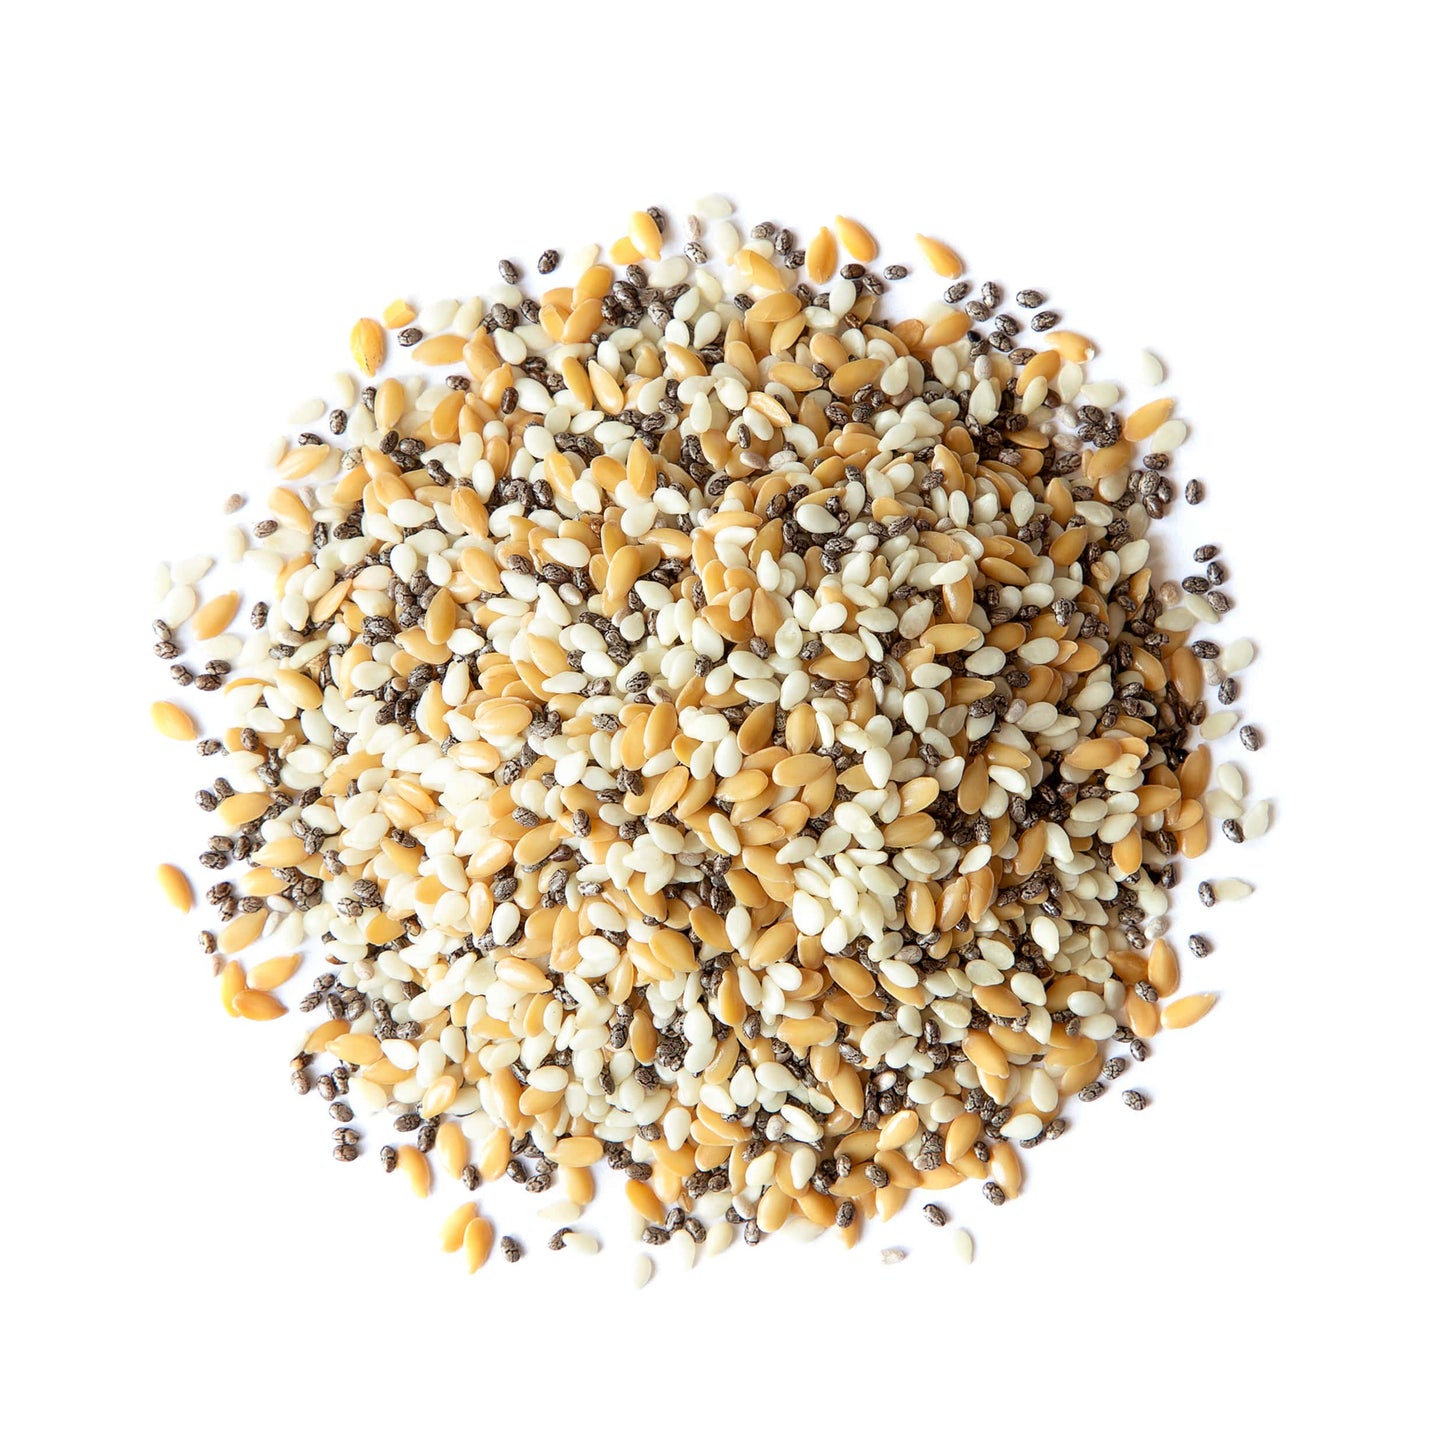 Organic Omega-3 Seeds Mix with Flax, Chia and Sesame, X Pounds - A Blend of Non-GMO Whole Seeds, Raw, Kosher, Vegan, Bulk. Rich in Omega 3 Fatty Acids and Dietary Fiber. Great for Salads and Oatmeal